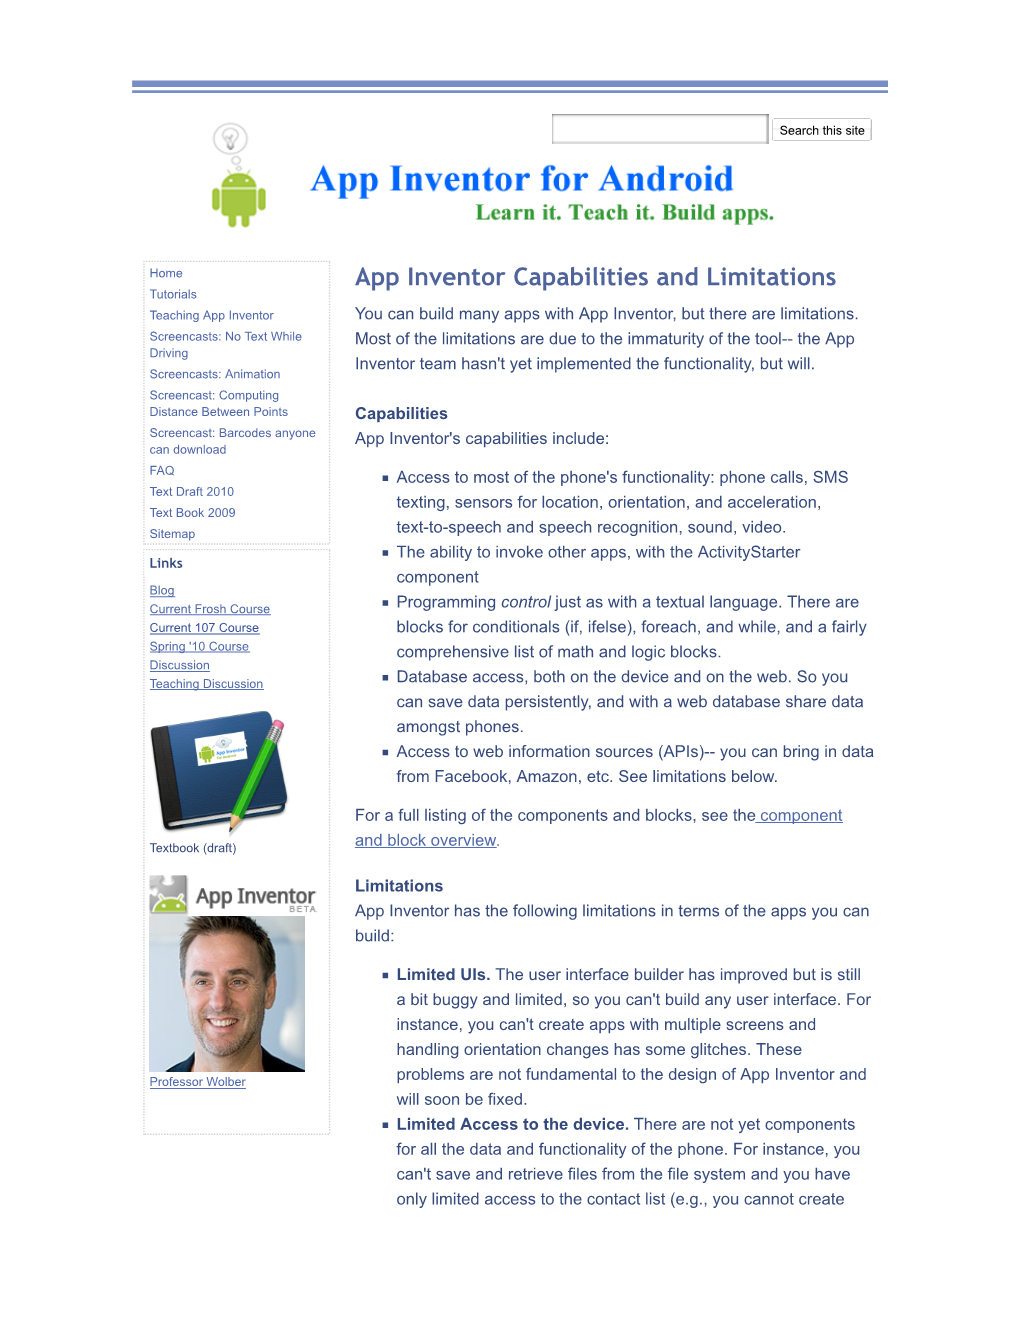 Appinventor.Org Building Apps with App Inventor for Android